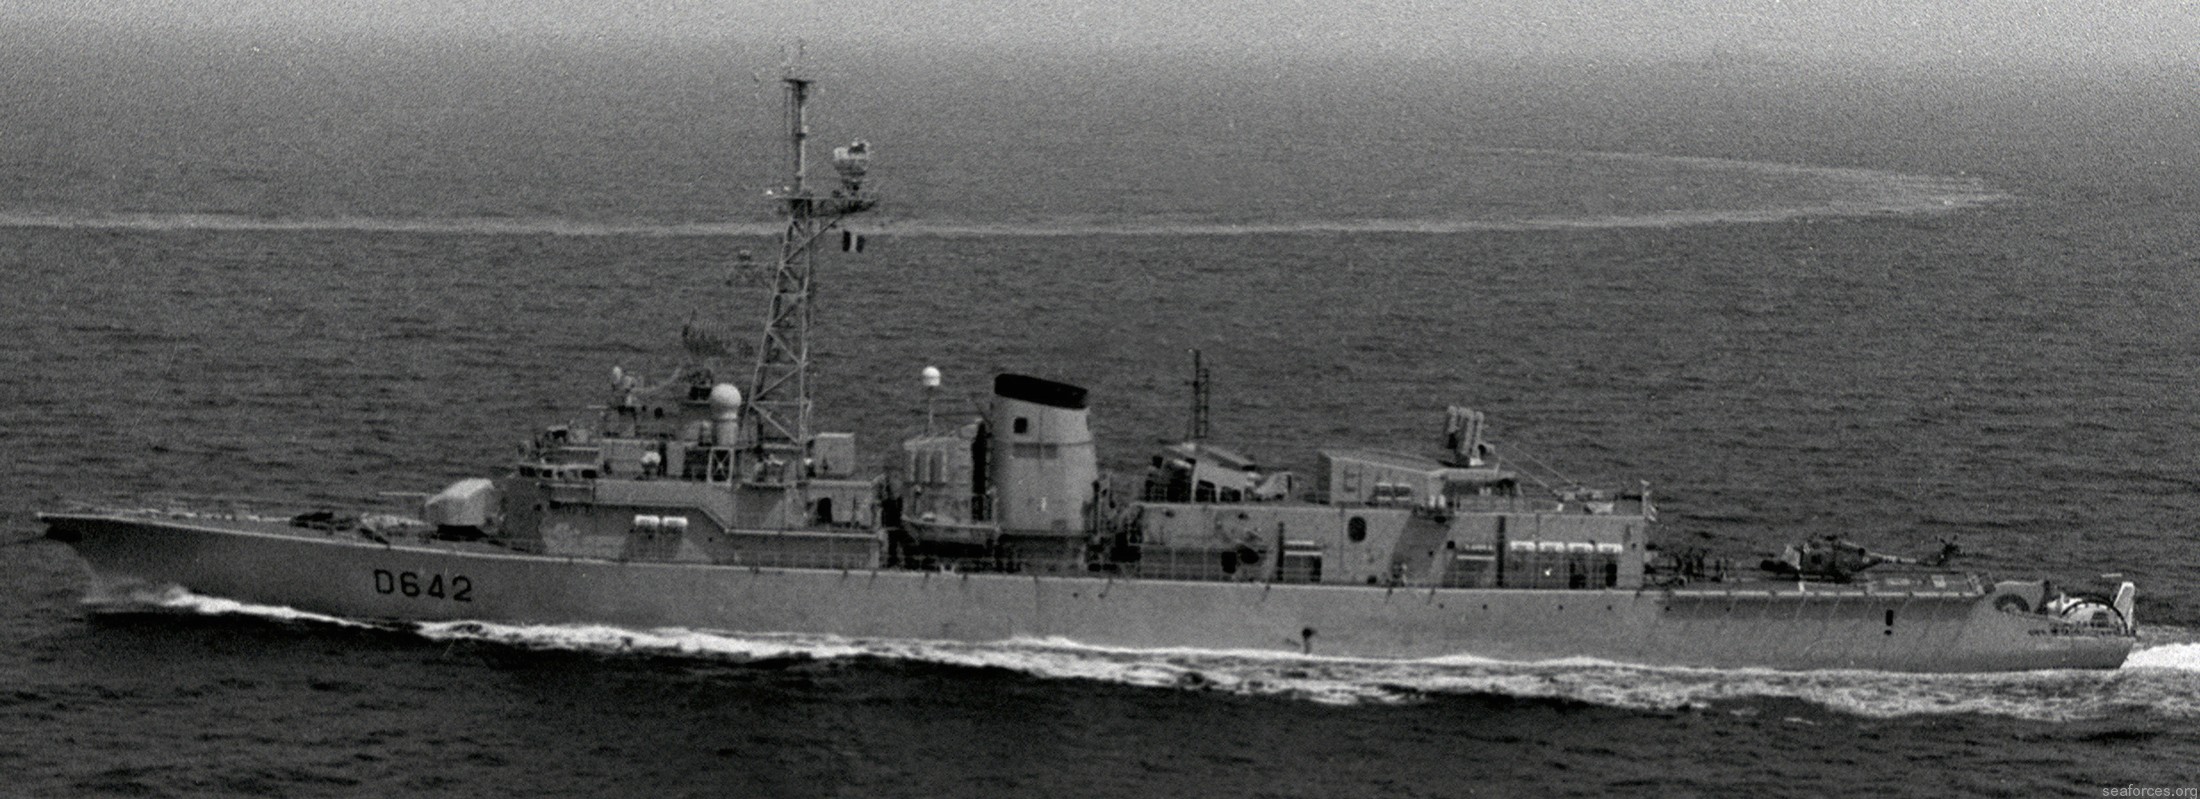 d-642 fs montcalm georges leygues f70as class anti submarine frigate destroyer asw french navy marine nationale 04